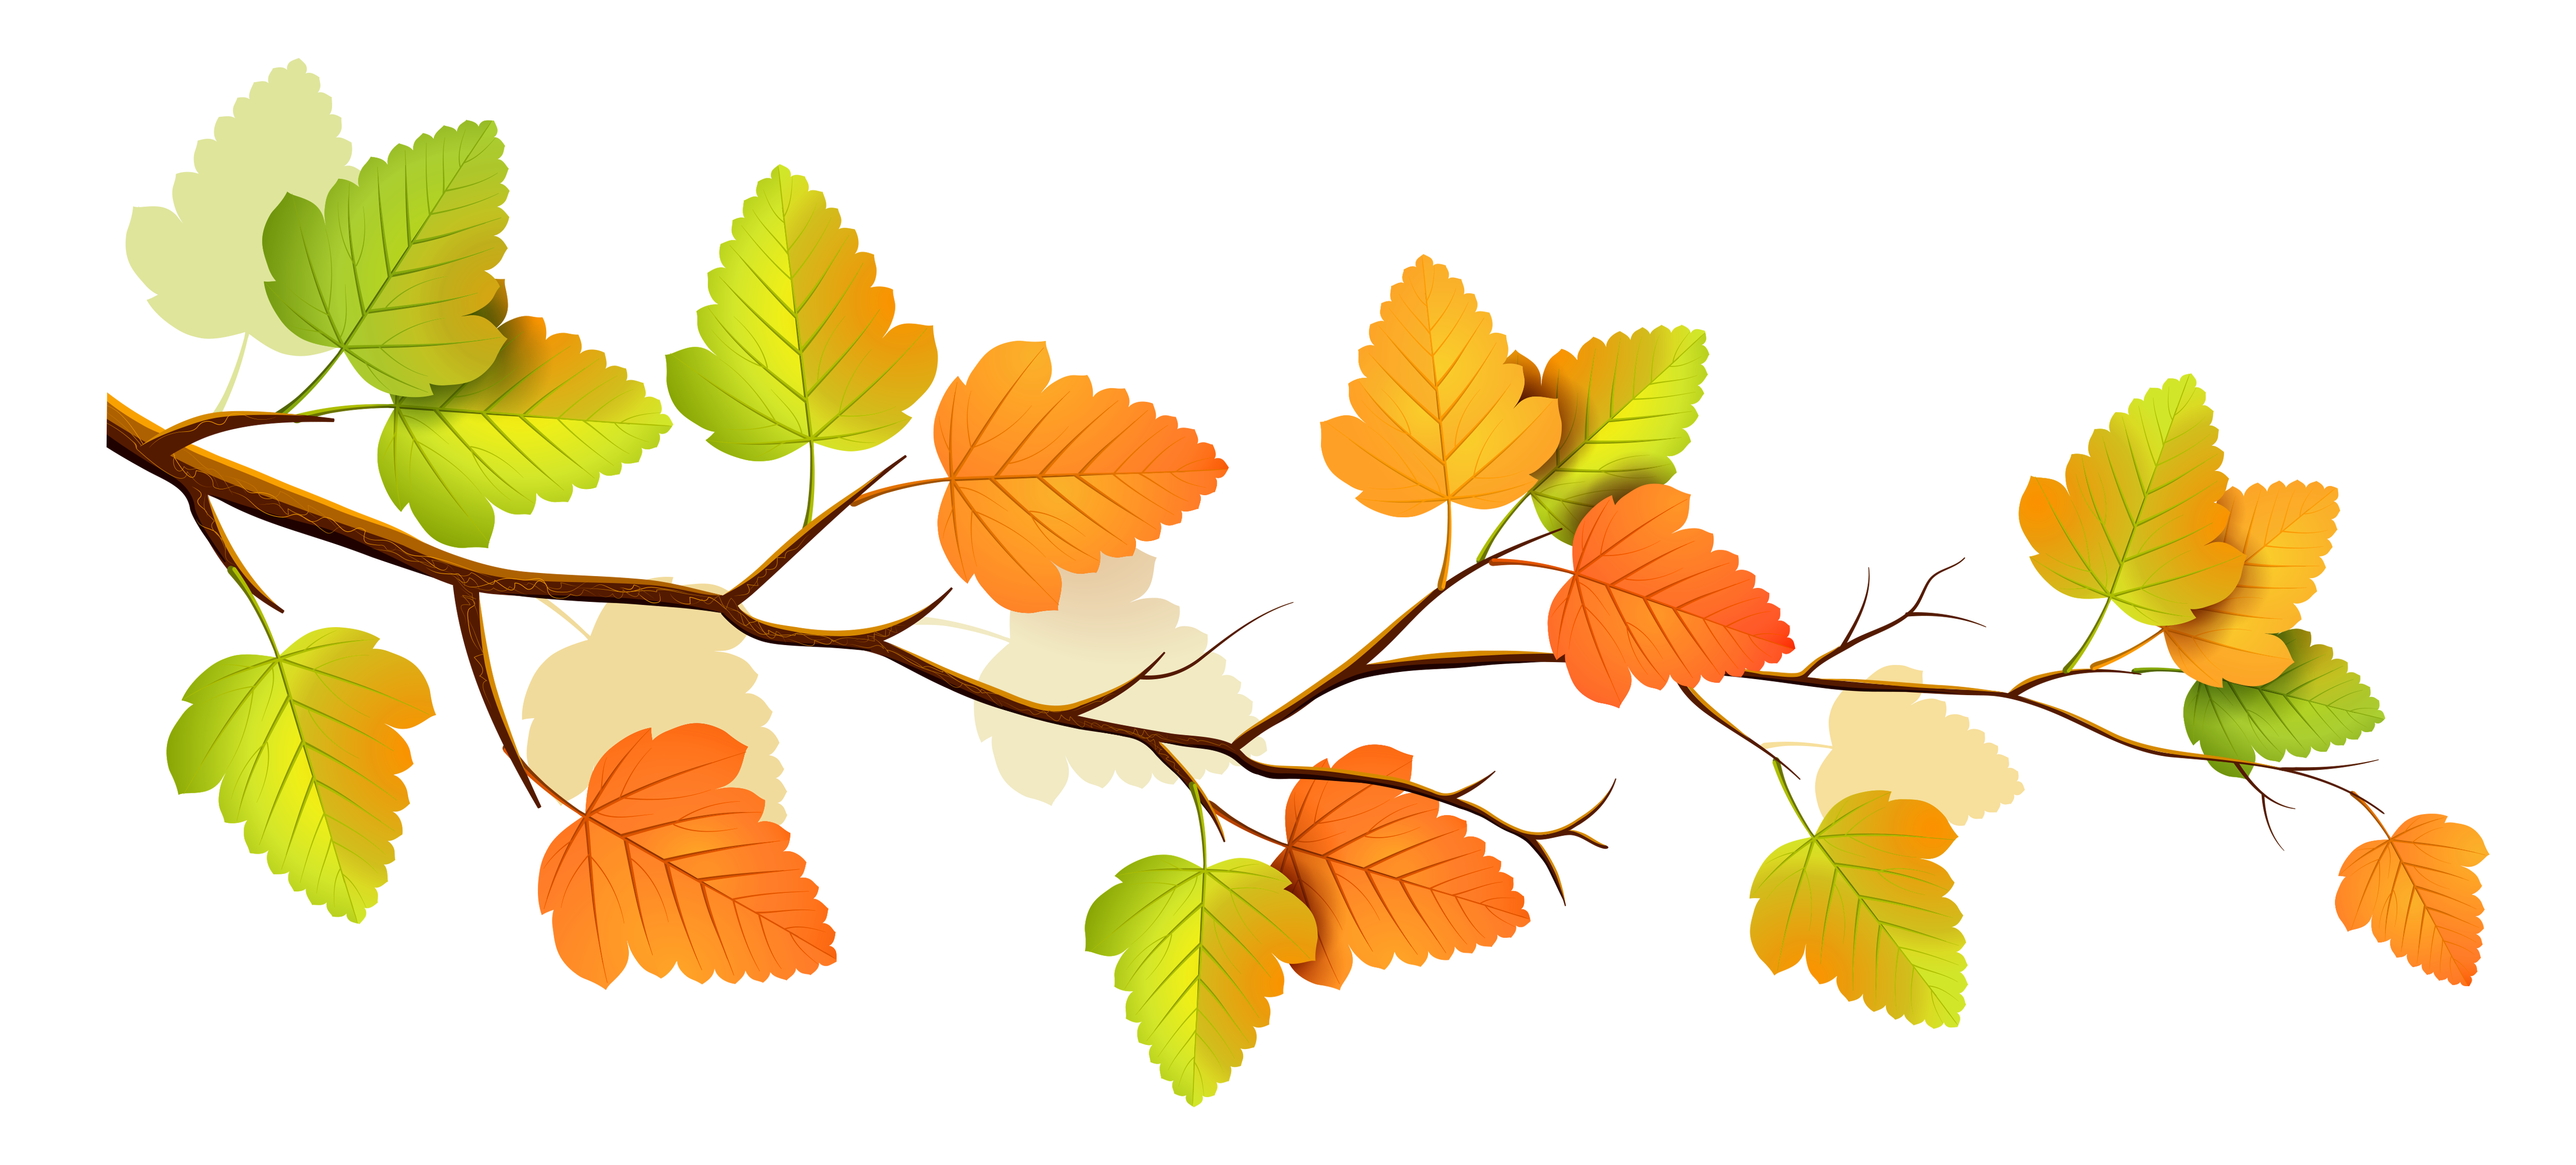 Fall decor png gallery. Decorative clipart autumn tree branch